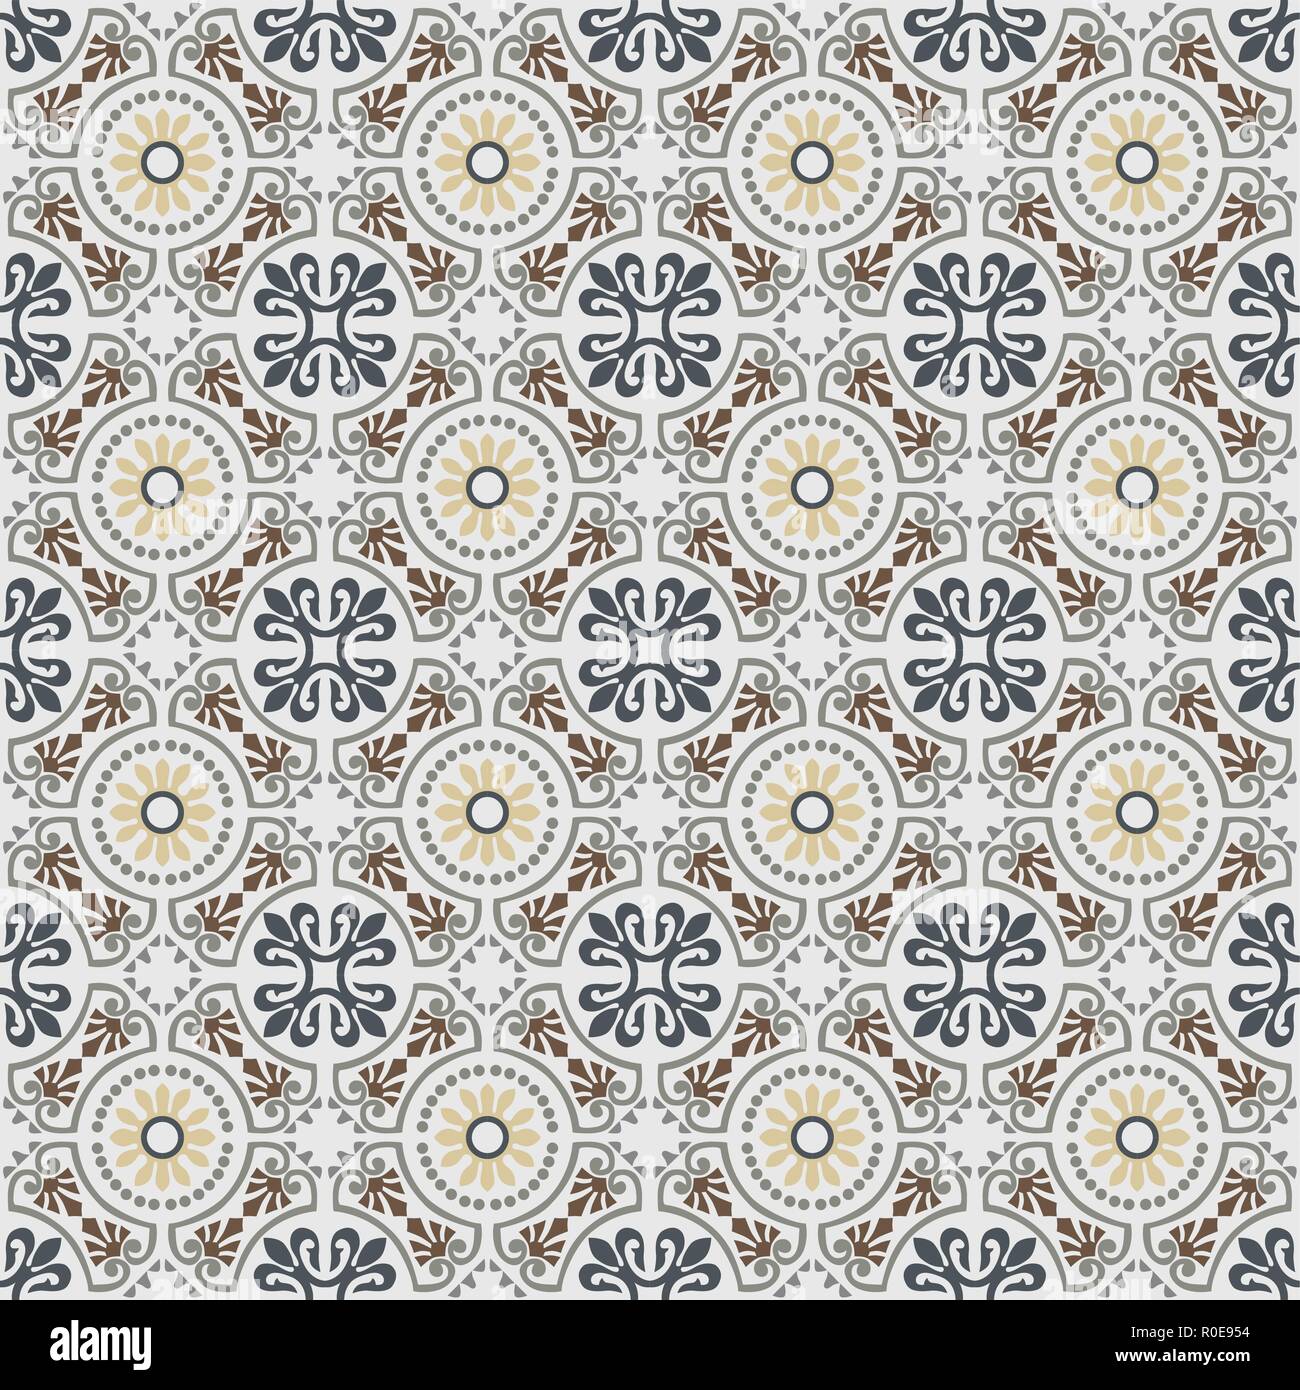 Vintage Mediterranean tiles style pattern, usually used in tiles in Spain, Portugal and other Mediterranean countries Stock Vector